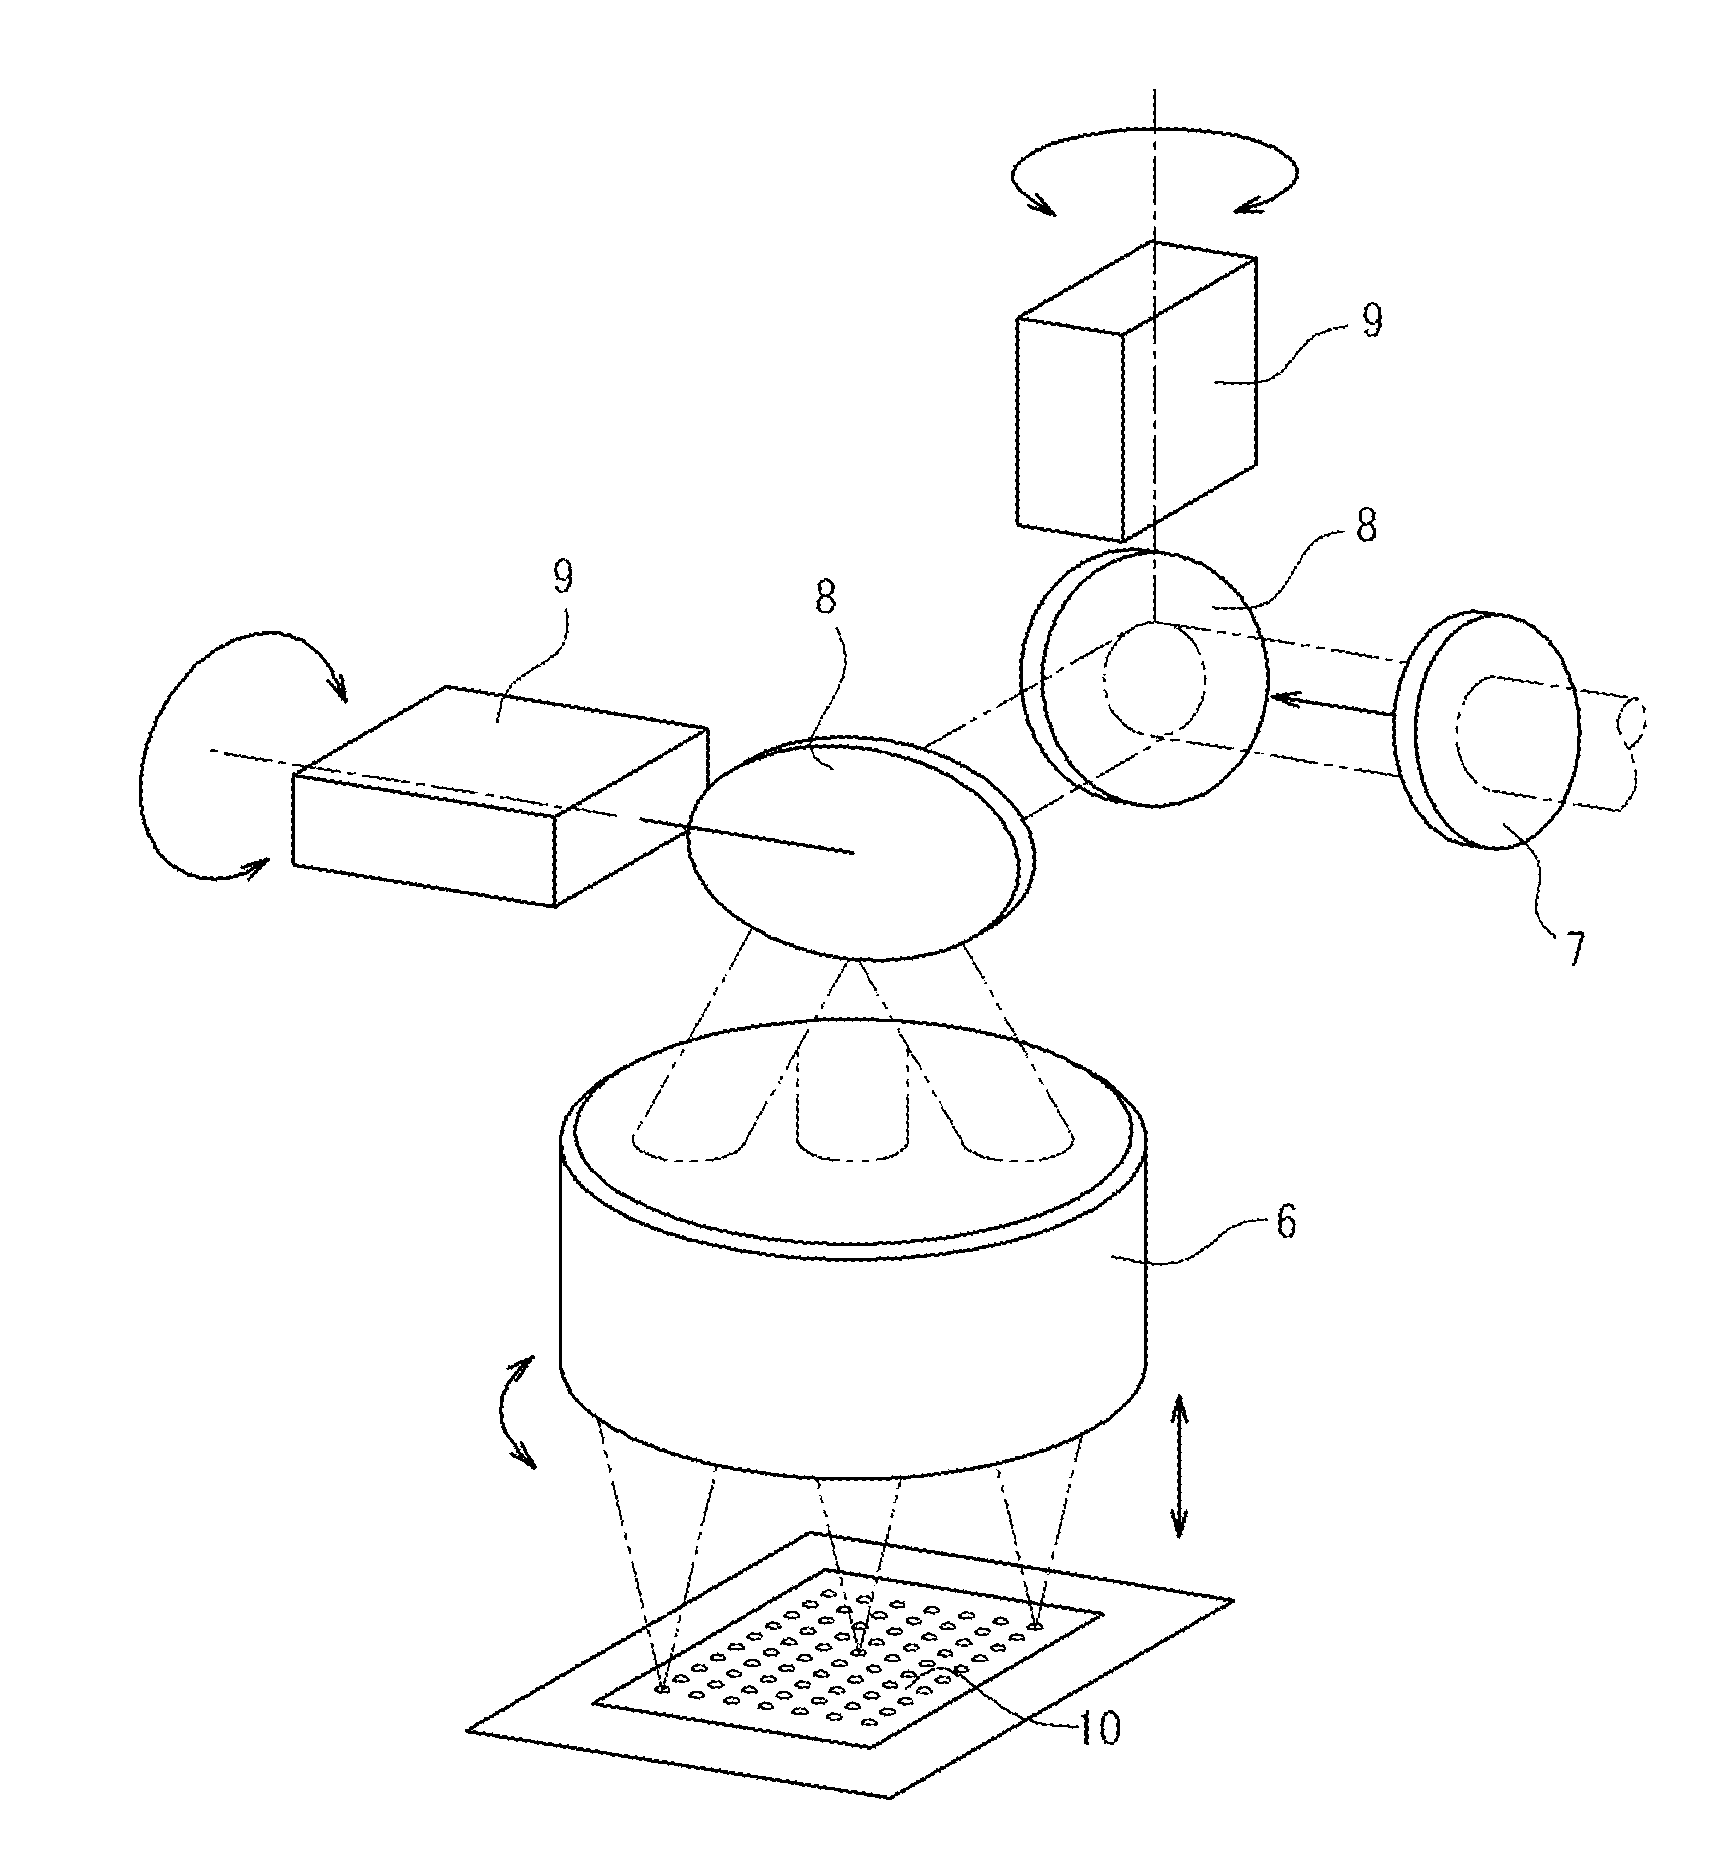 Light condensing optical system, laser processing method and apparatus, and method of manufacturing fragile material